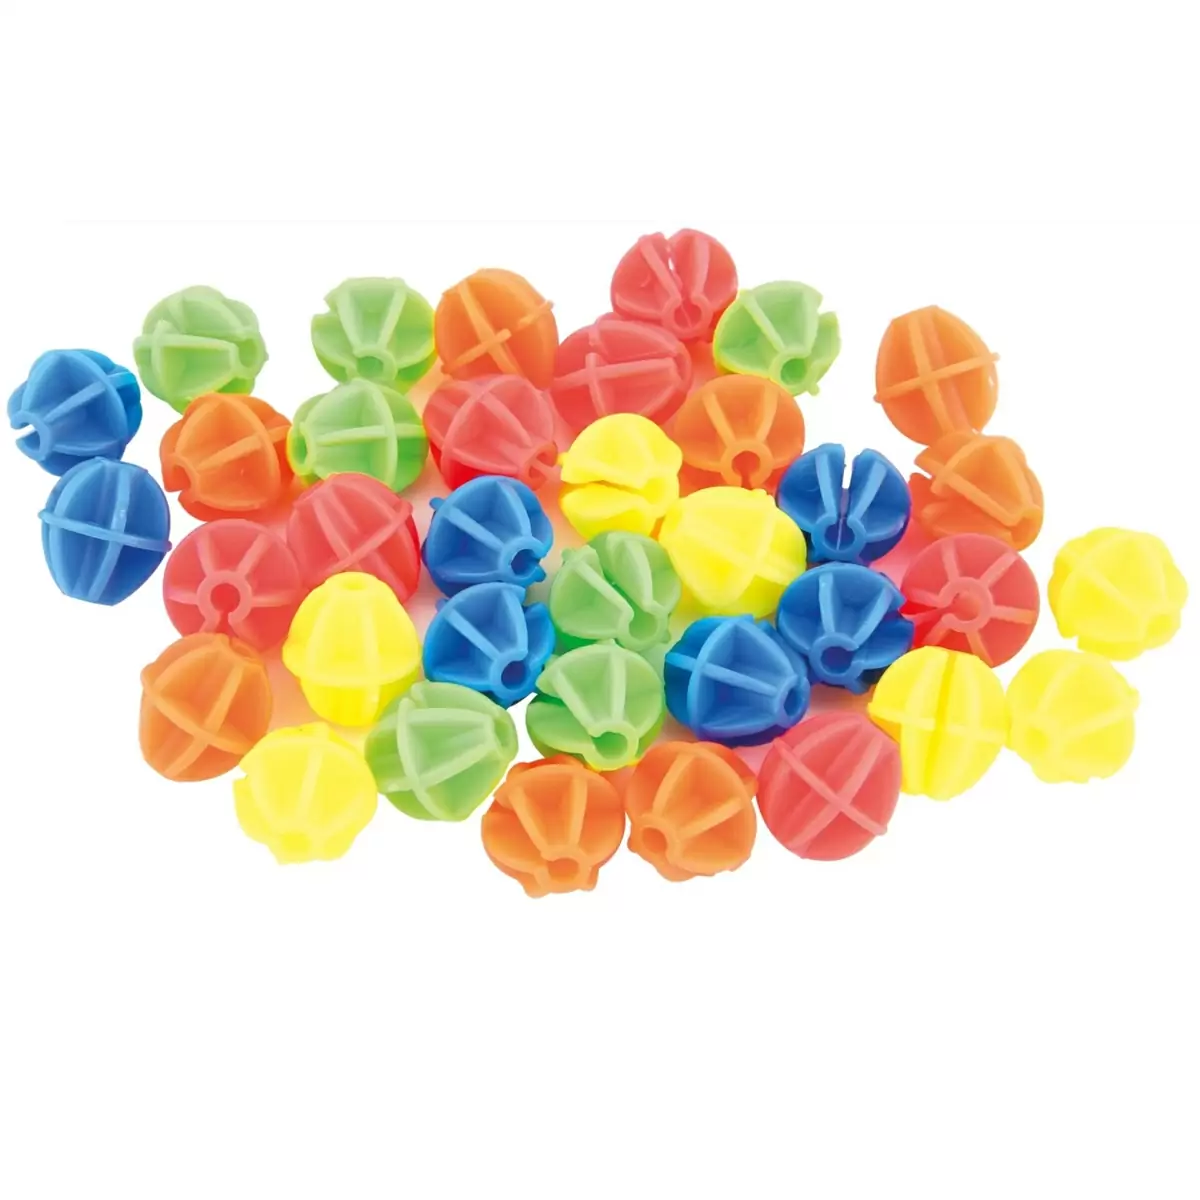 Kit 36 pieces sound beads for spokes - image